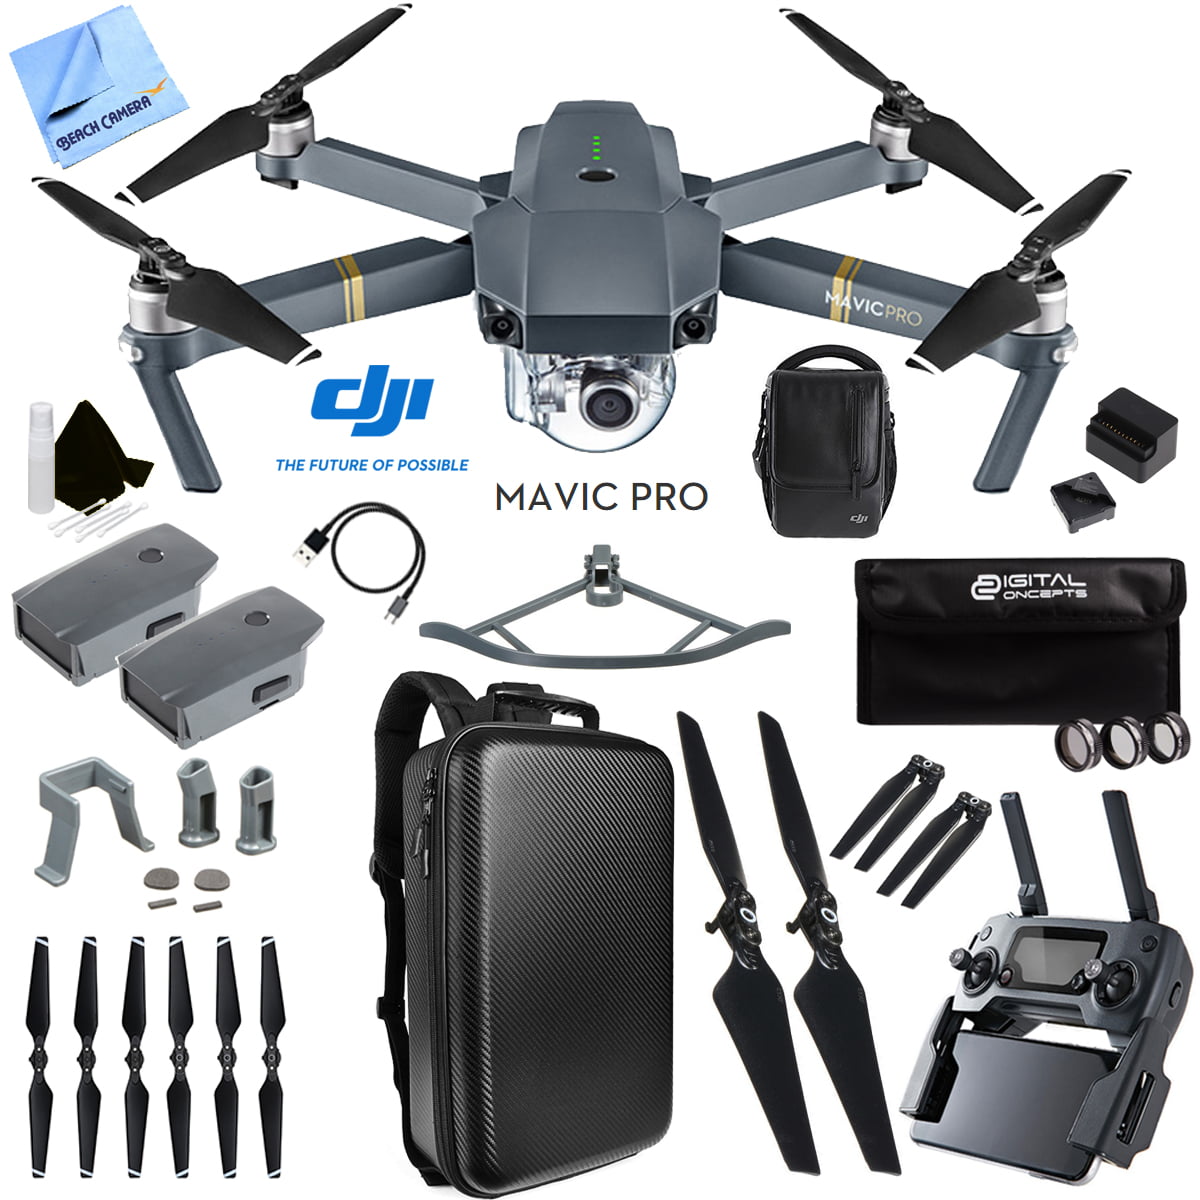 DJI Mavic Pro 4K Quadcopter Drone Fly More Combo Pack 2 Extra